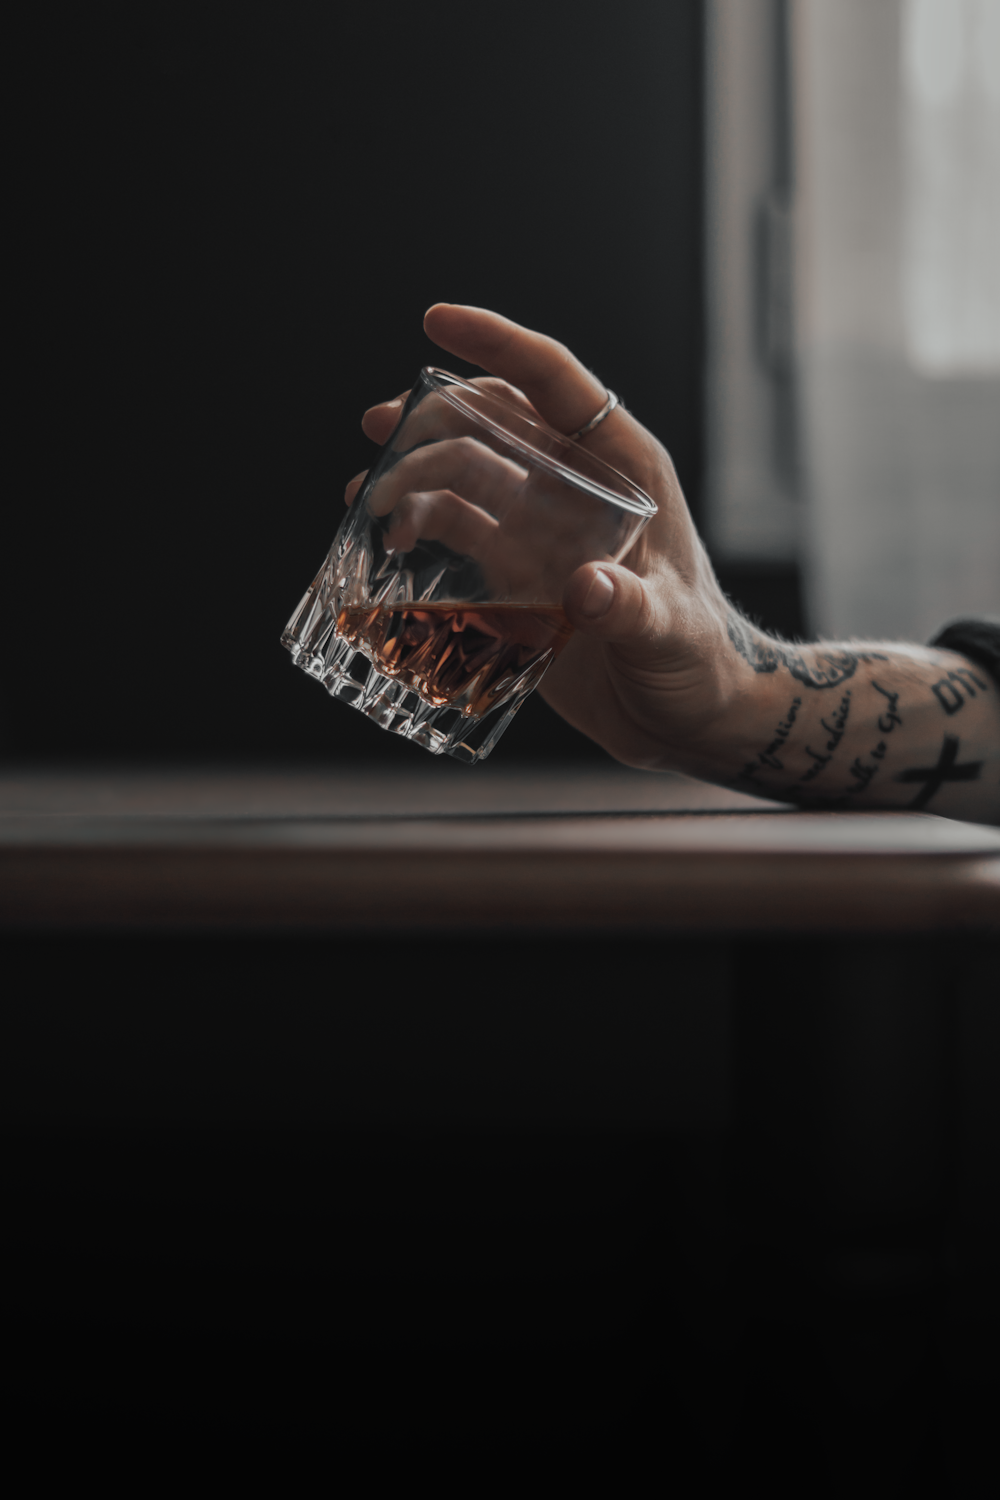 a person with tattoos holding a glass of alcohol